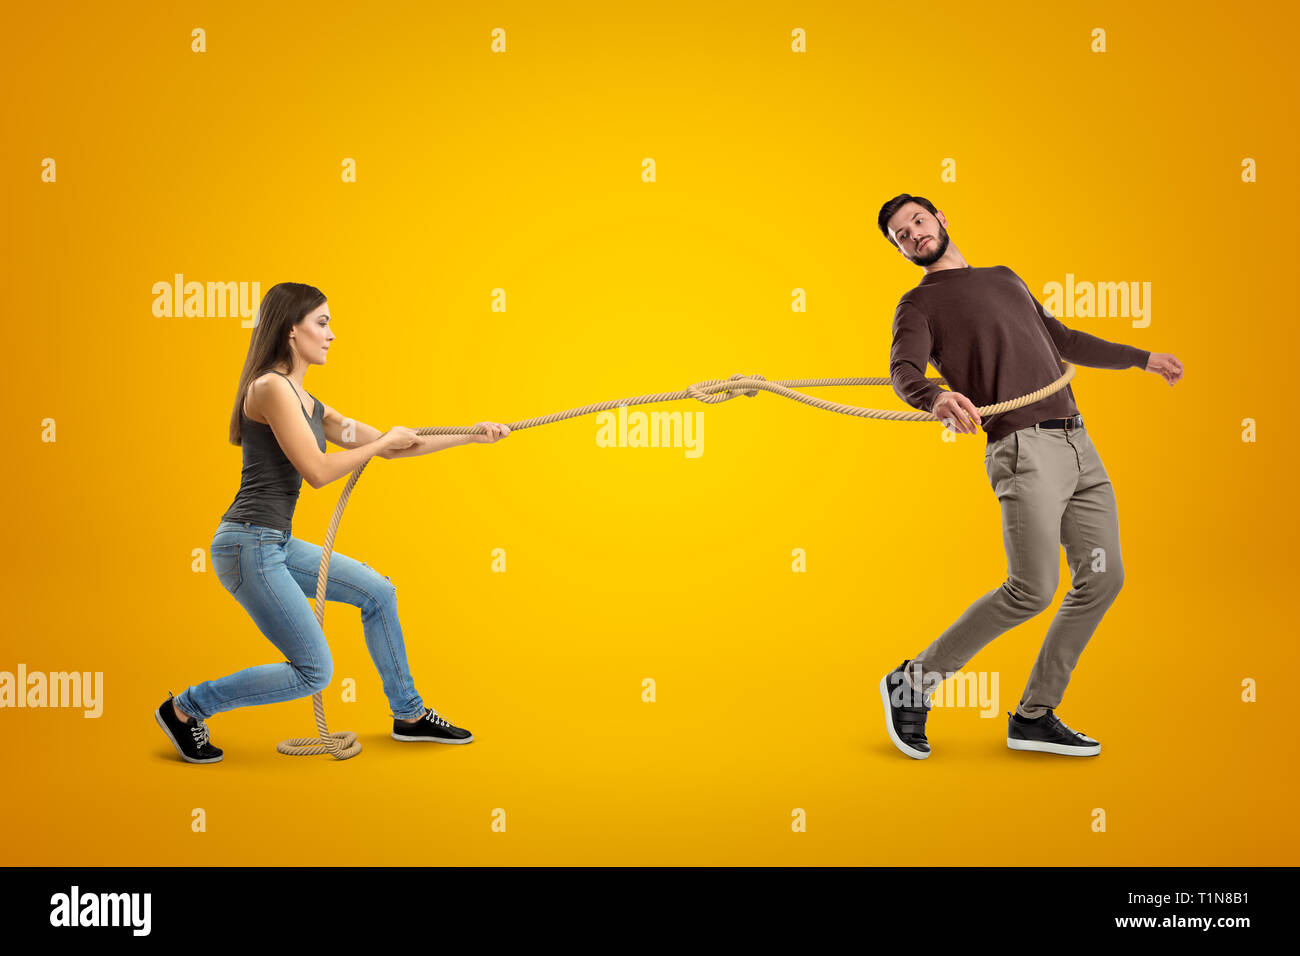 Side view of young woman lassooing young man on yellow background. Stock Photo